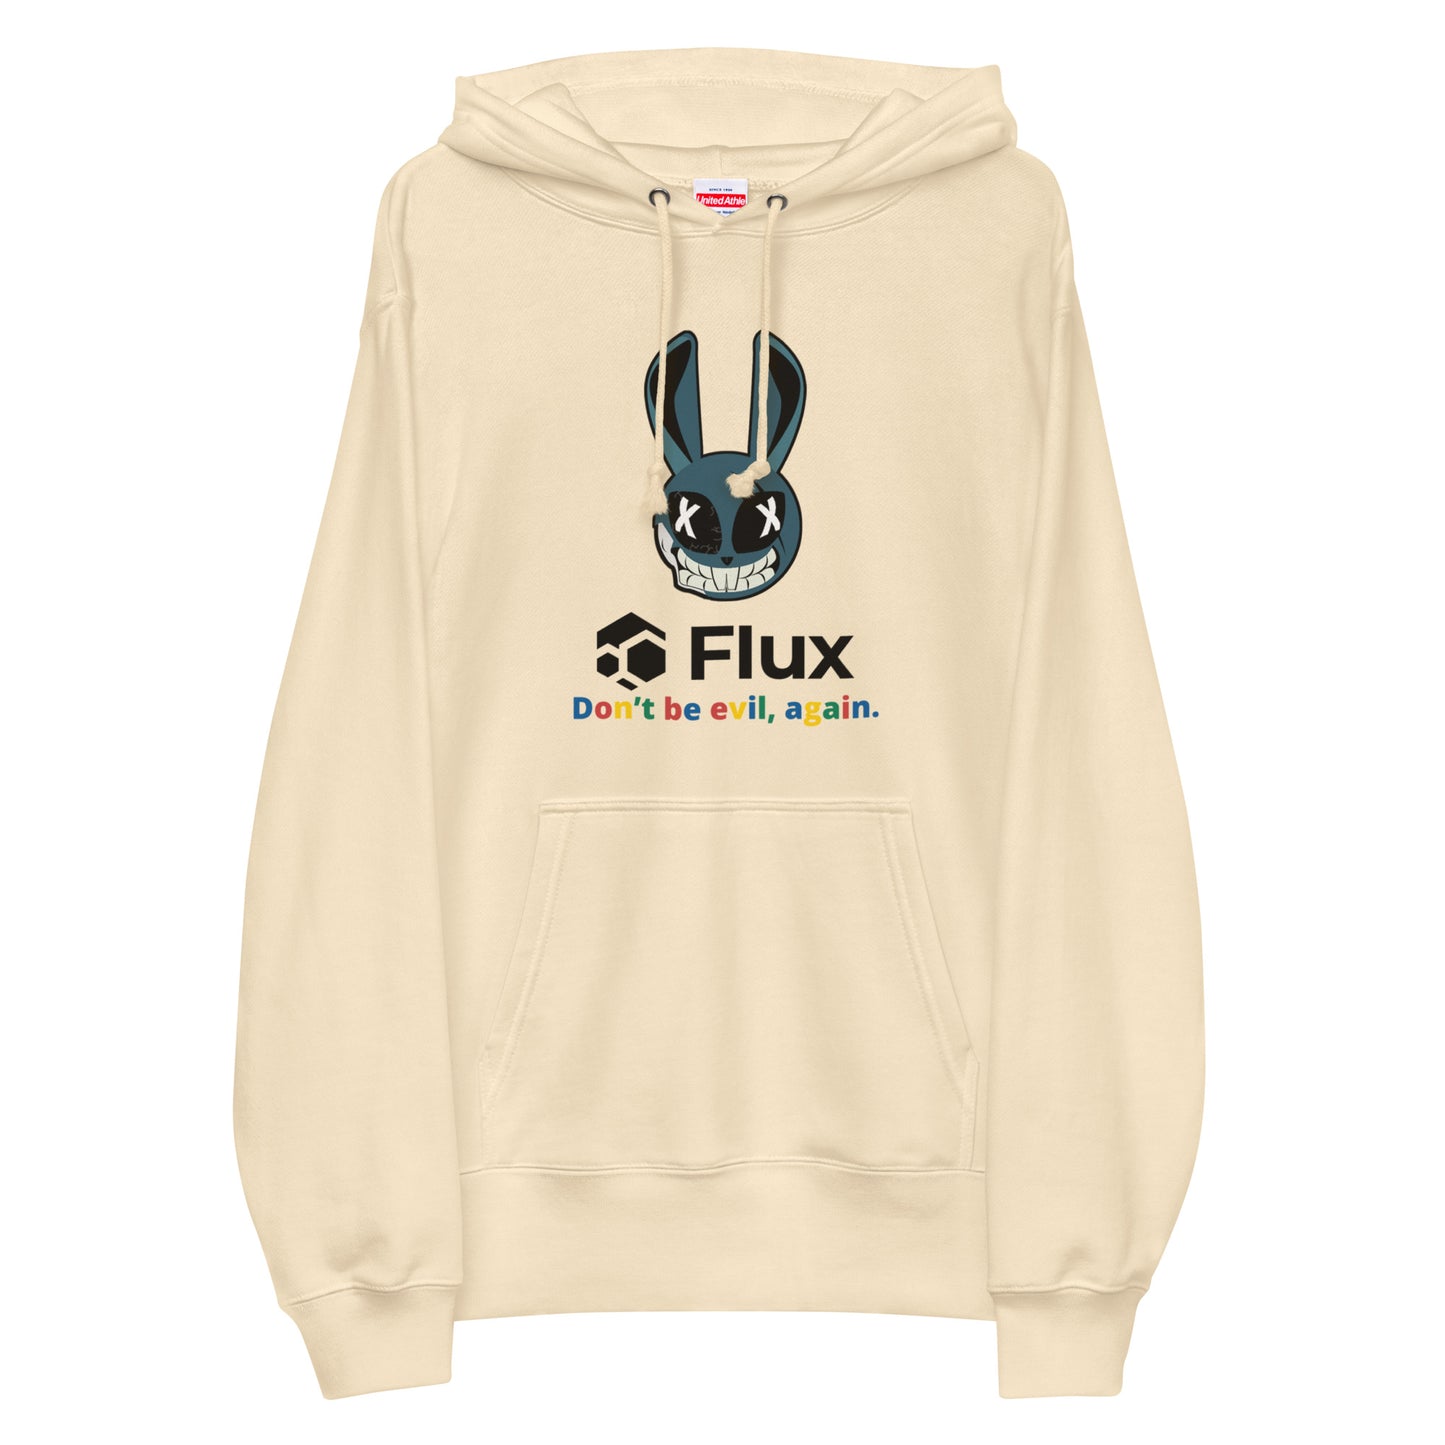 FLUX "Don't be evil, again." Unisex French Terry Pullover Hoodie